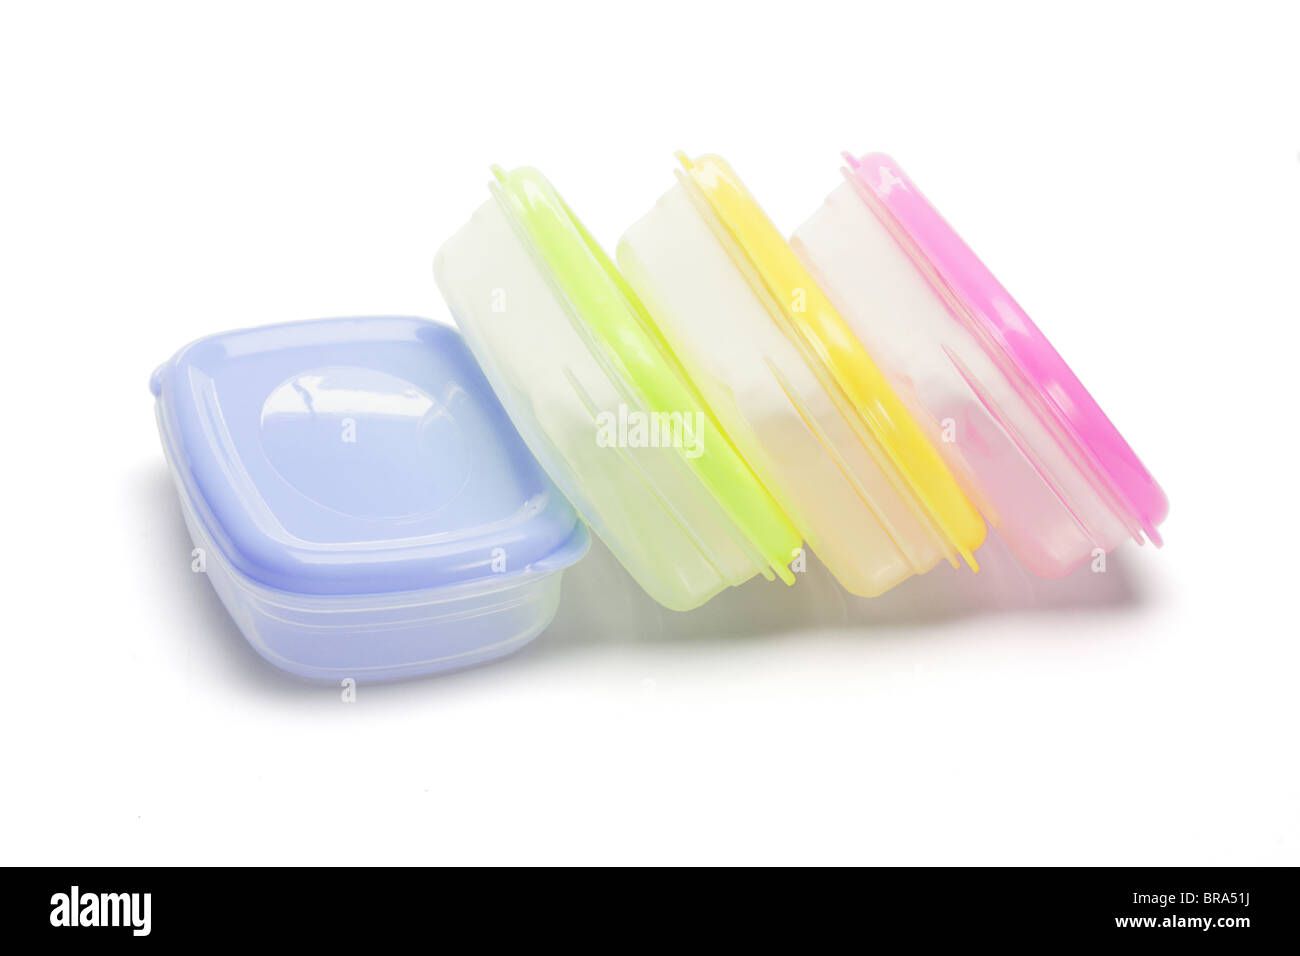 Four plastic storage containers on white background Stock Photo